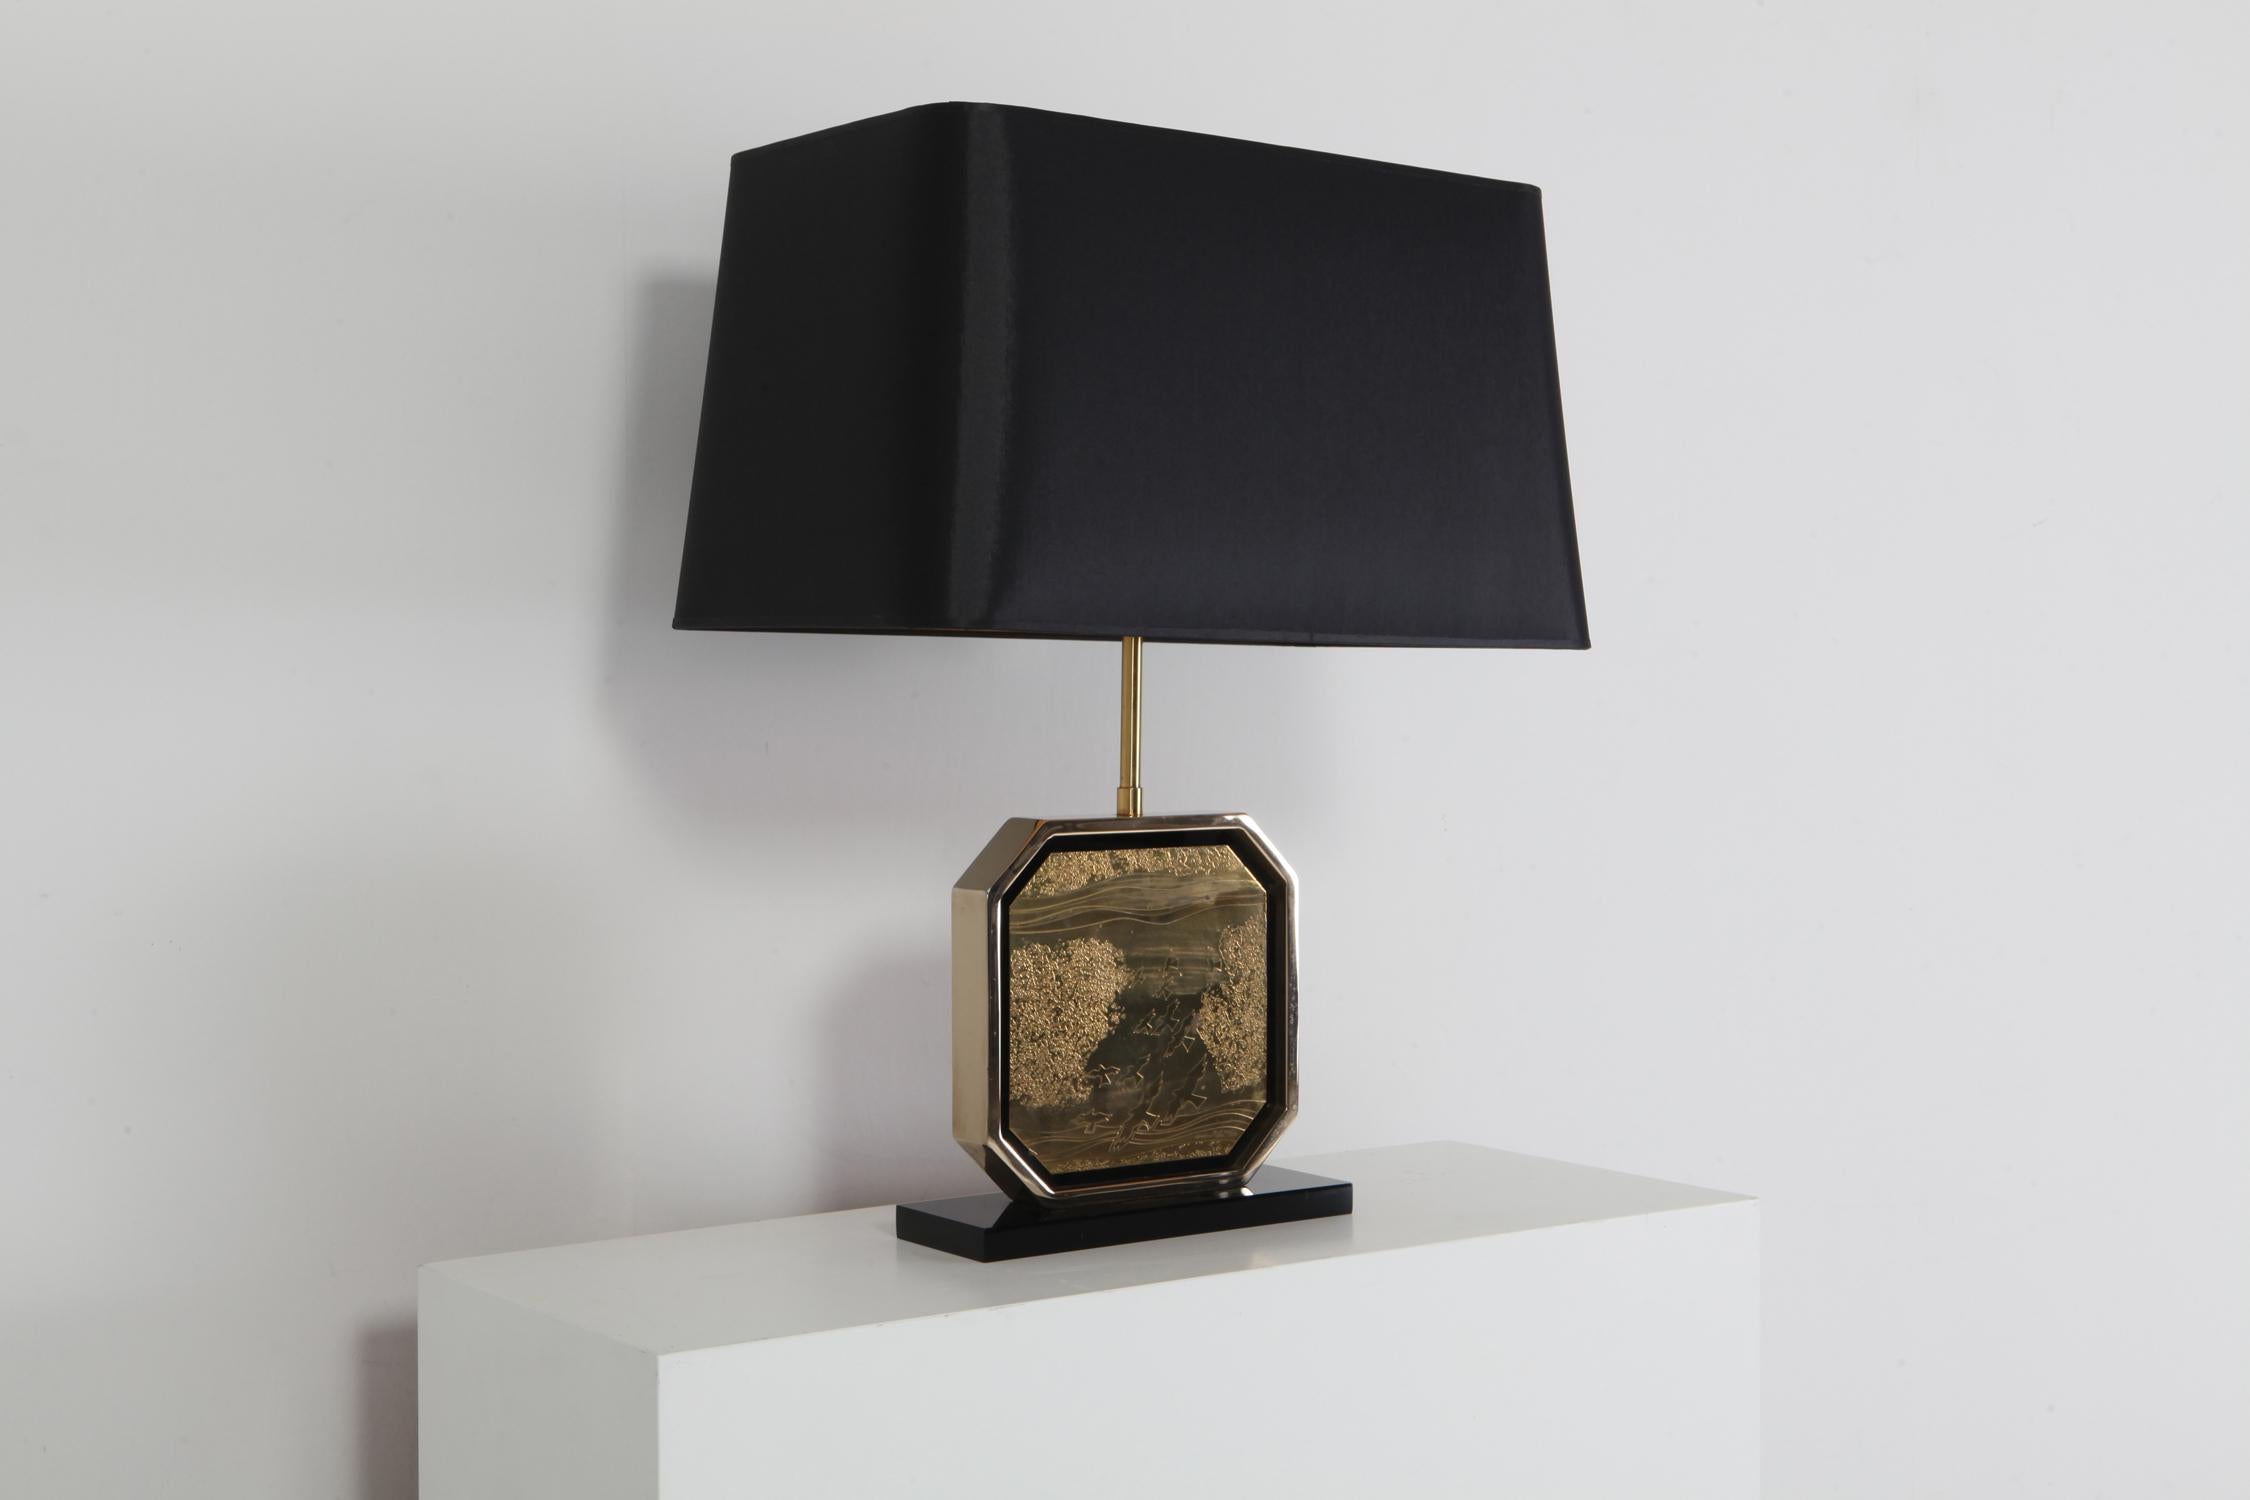 Glam table lamp in Hollywood Regency style.
Luxury piece with a 24-Karat gold plated brass frame and a brass etched artwork by maho in centre.
Beautiful black silk shade with gold lining.